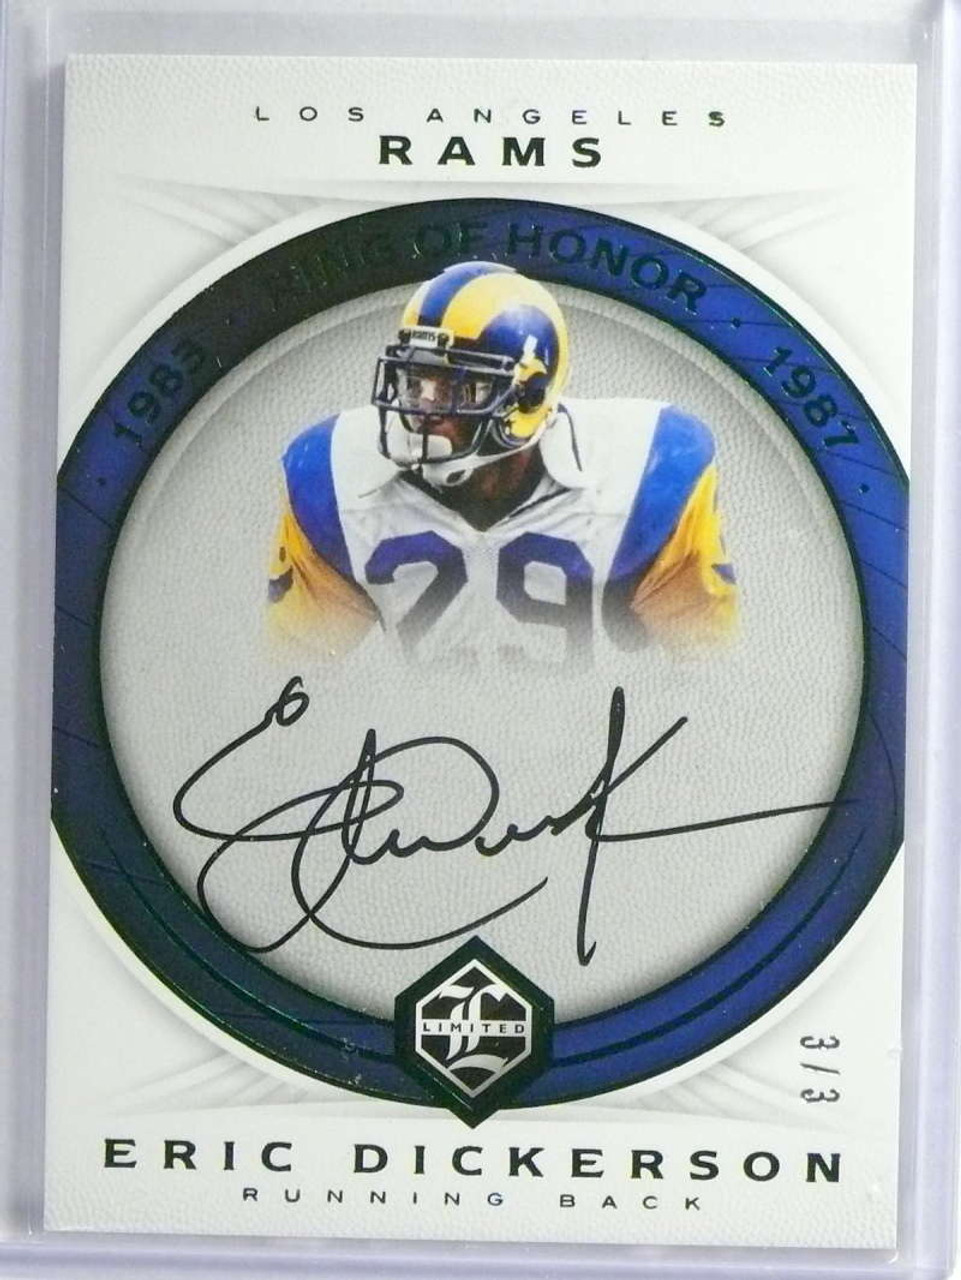 2017 Panini Limited Ring Of Honor Eric Dickerson autograph auto